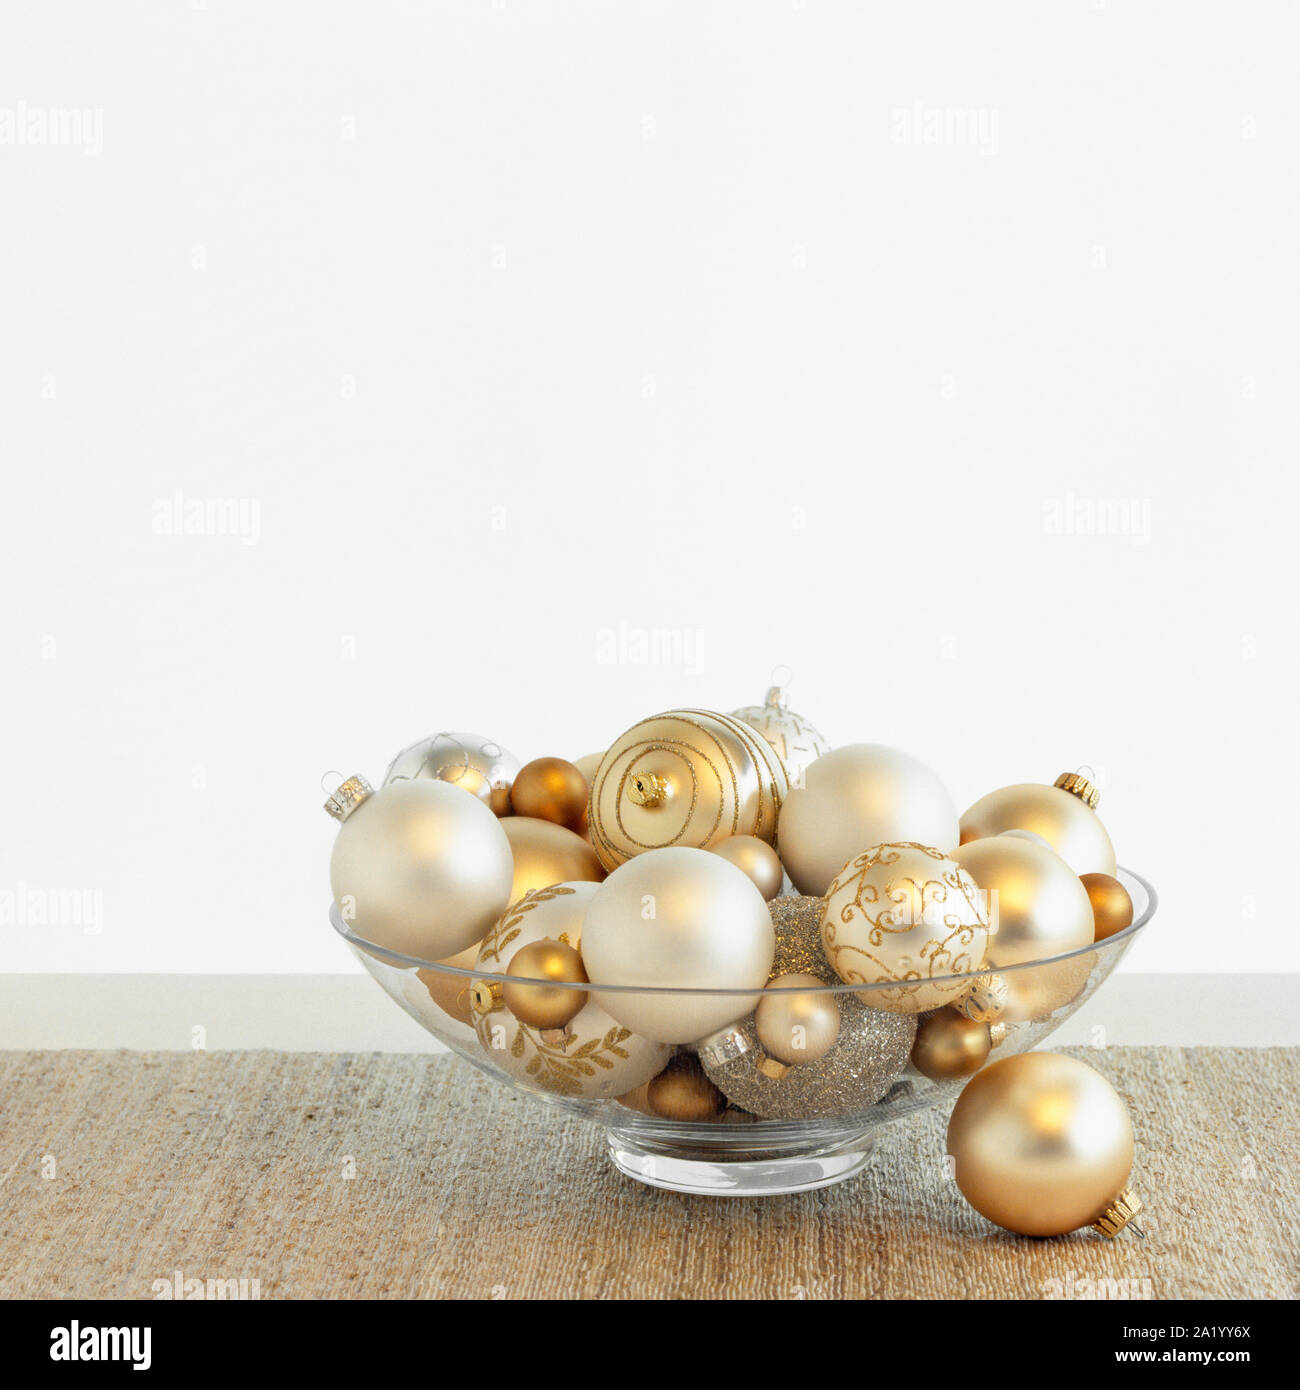 Beautiful, fancy silver and gold Christmas ornaments baubles in glass bowl with white background. Simple, modern, luxury holiday home interior decor. Stock Photo